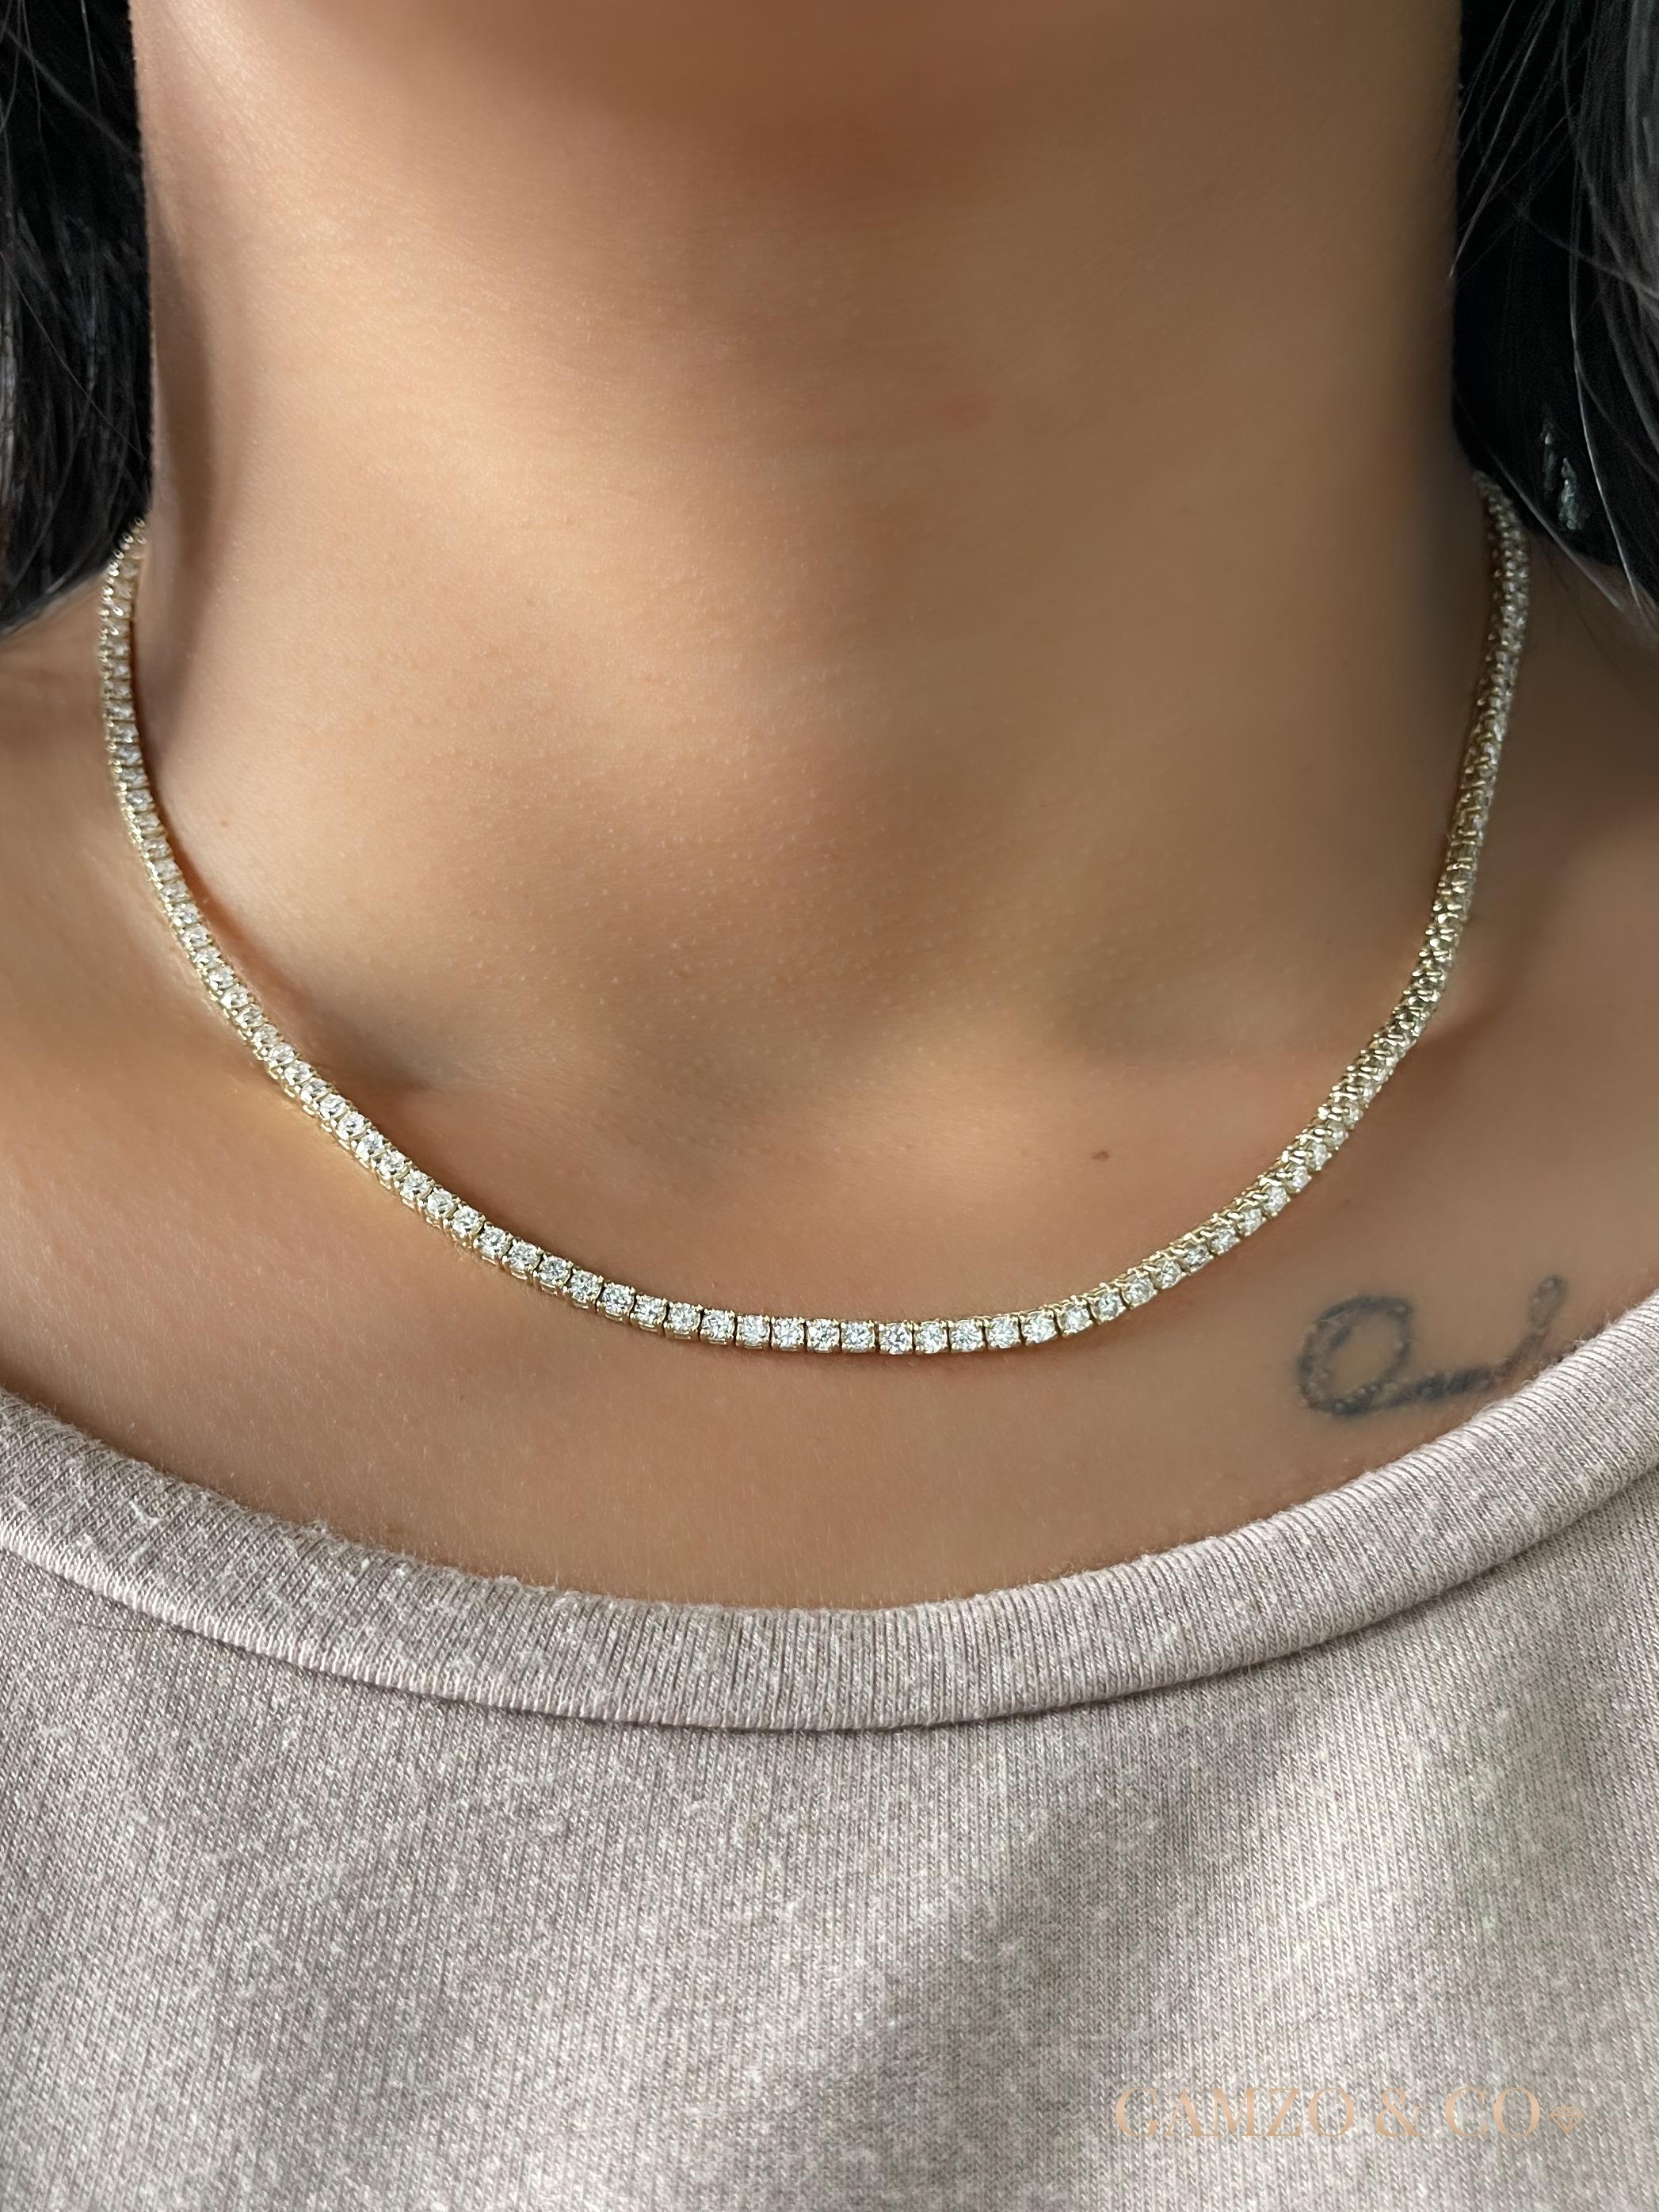 5 Carats of round diamond set on a shared prong setting in 14k white gold to create a timeless necklace. 

Metal: 14k Gold
Diamond Cut: Round
Total Approx. Diamond Carats: 5ct
Diamond Clarity: VS
Diamond Color: F-G
Size: 24
Color: White